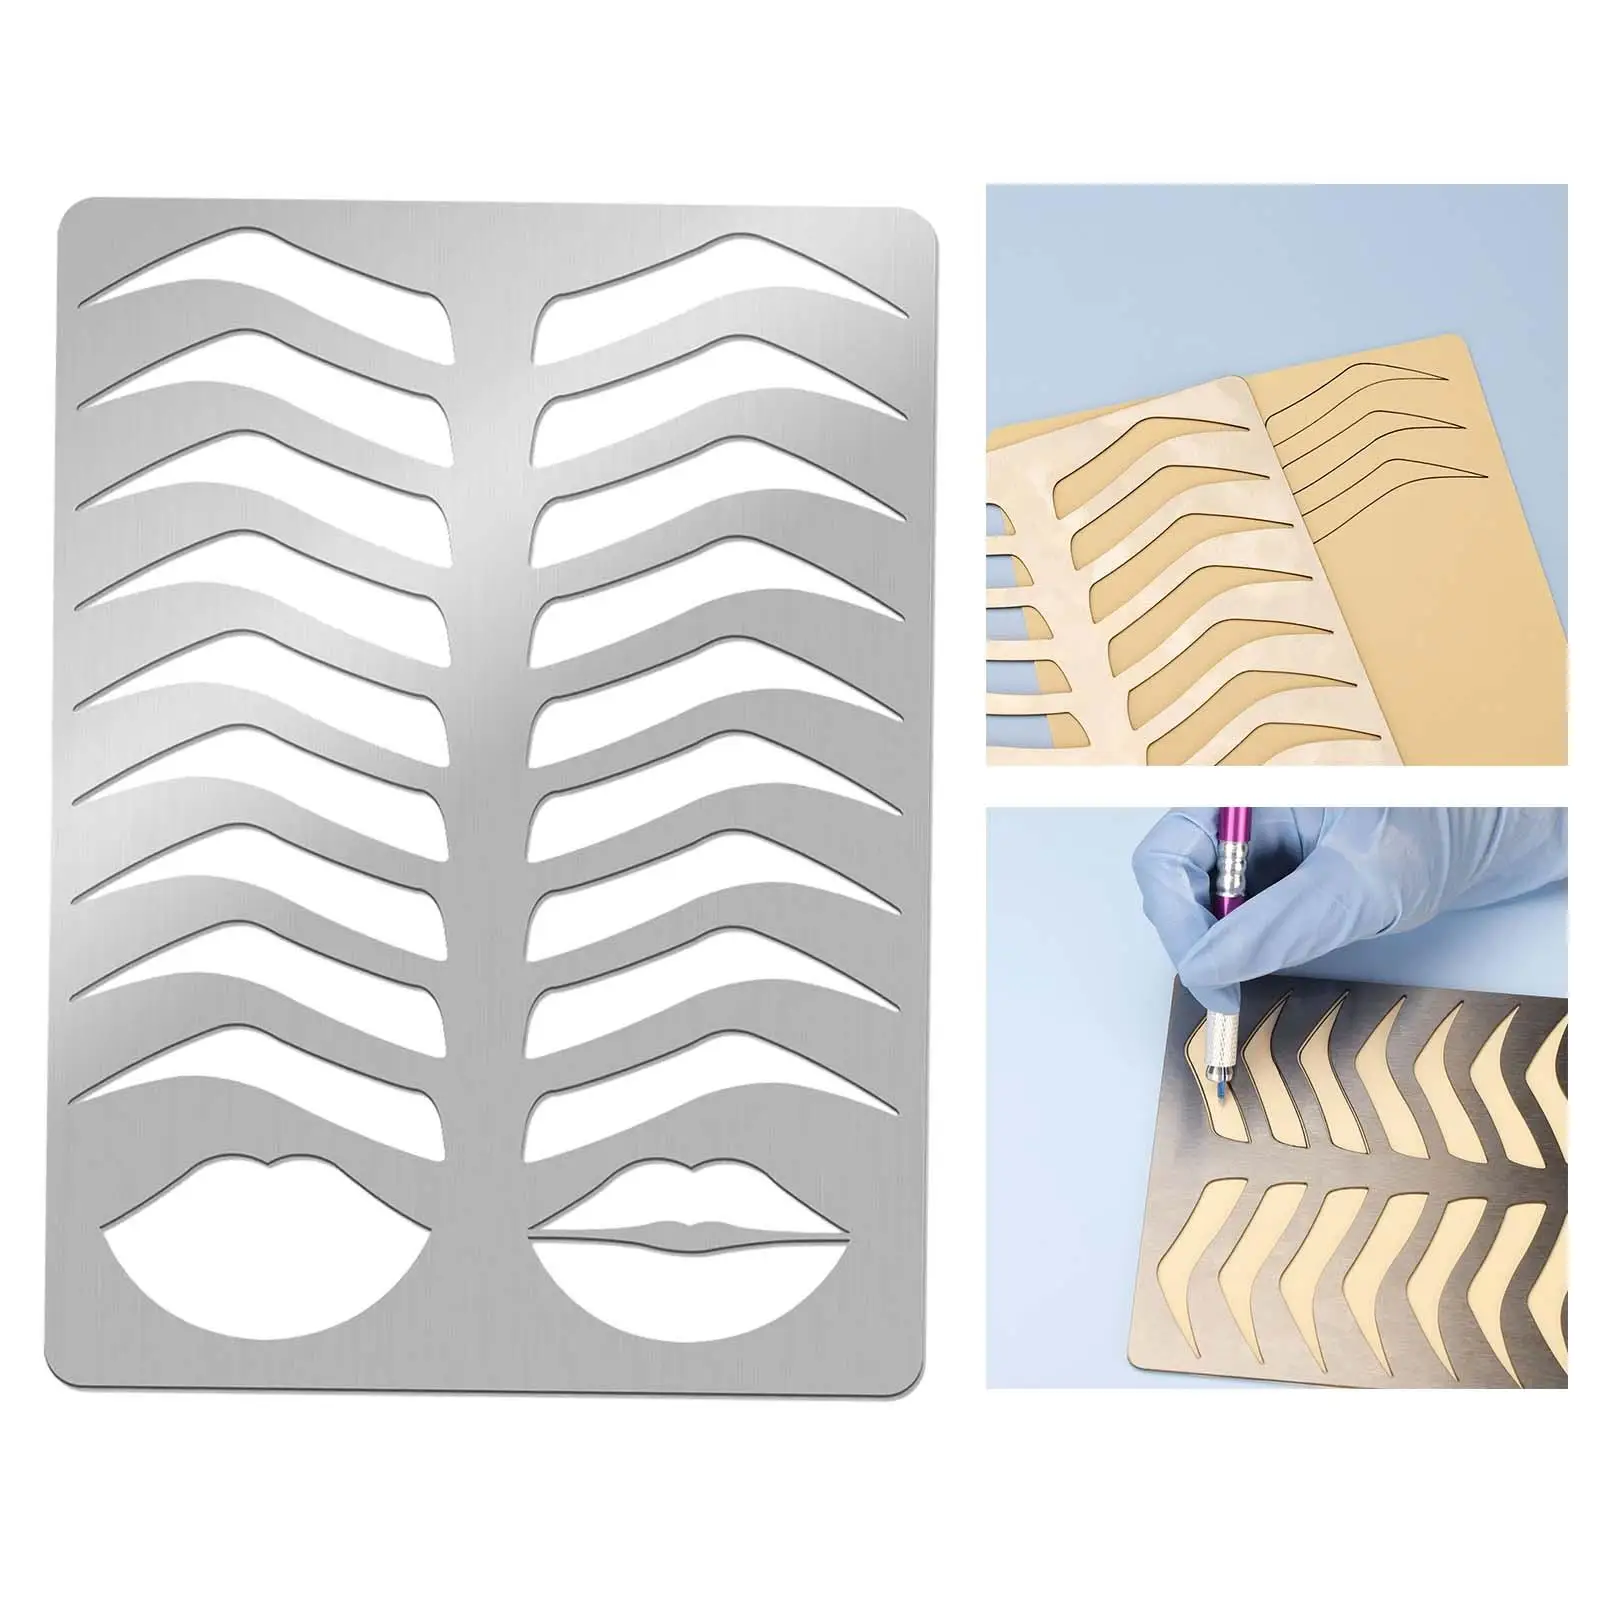 Eyebrow Lip Stencil Stainless Steel Reused Durable Professional Training Supplies Eyebrow Practice Stencil for Starter Beginner